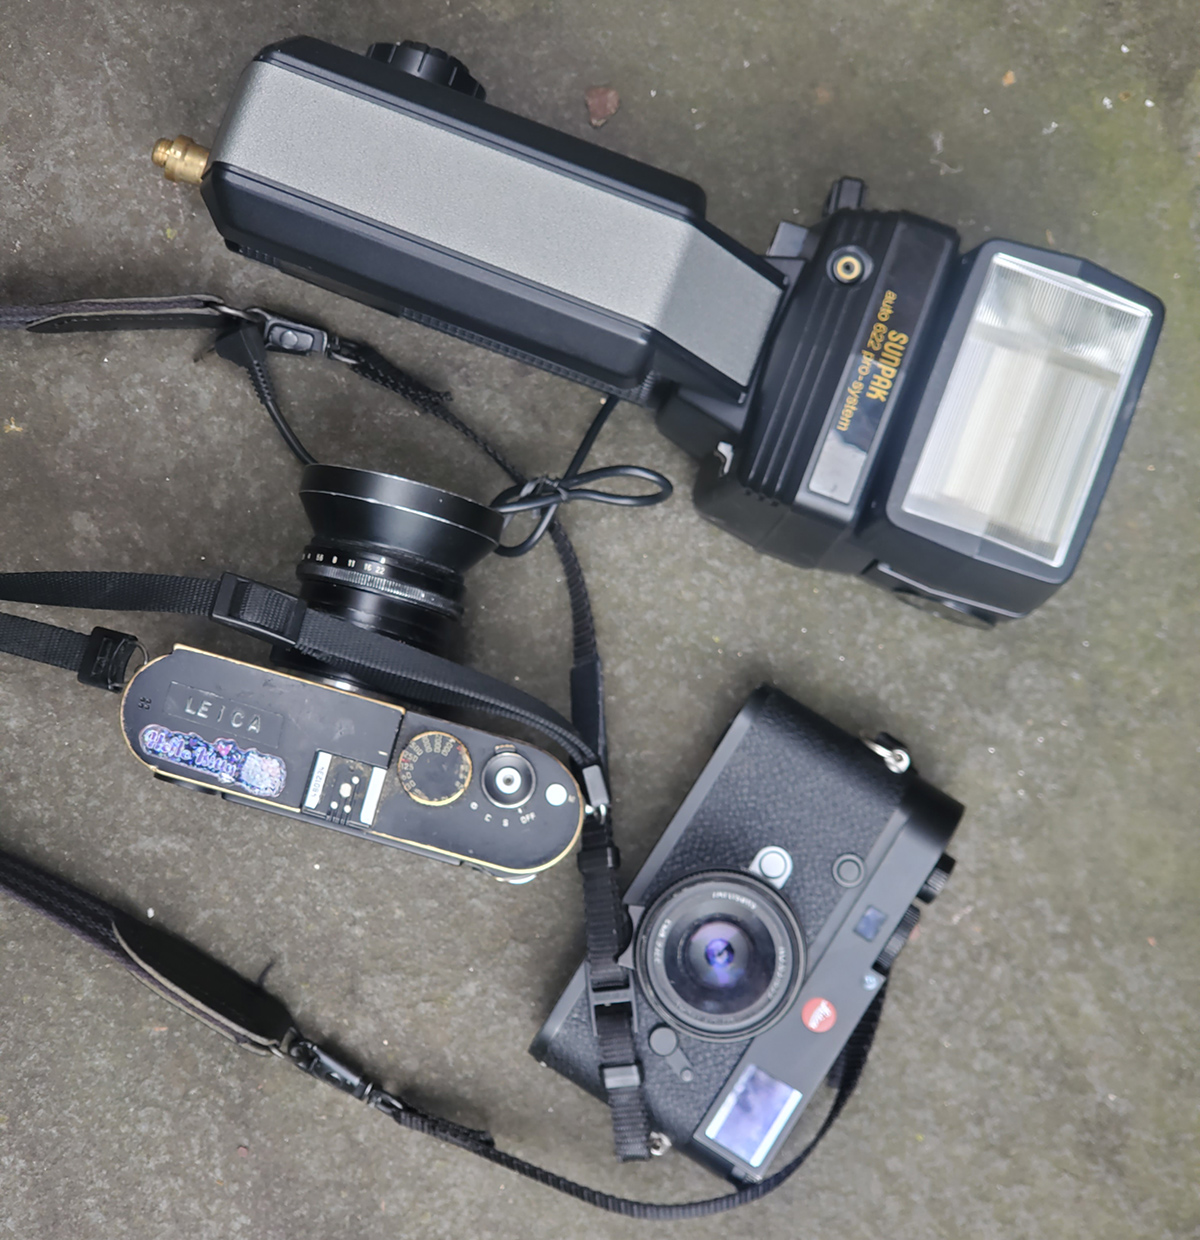 two small cameras and a large flash lying on the ground